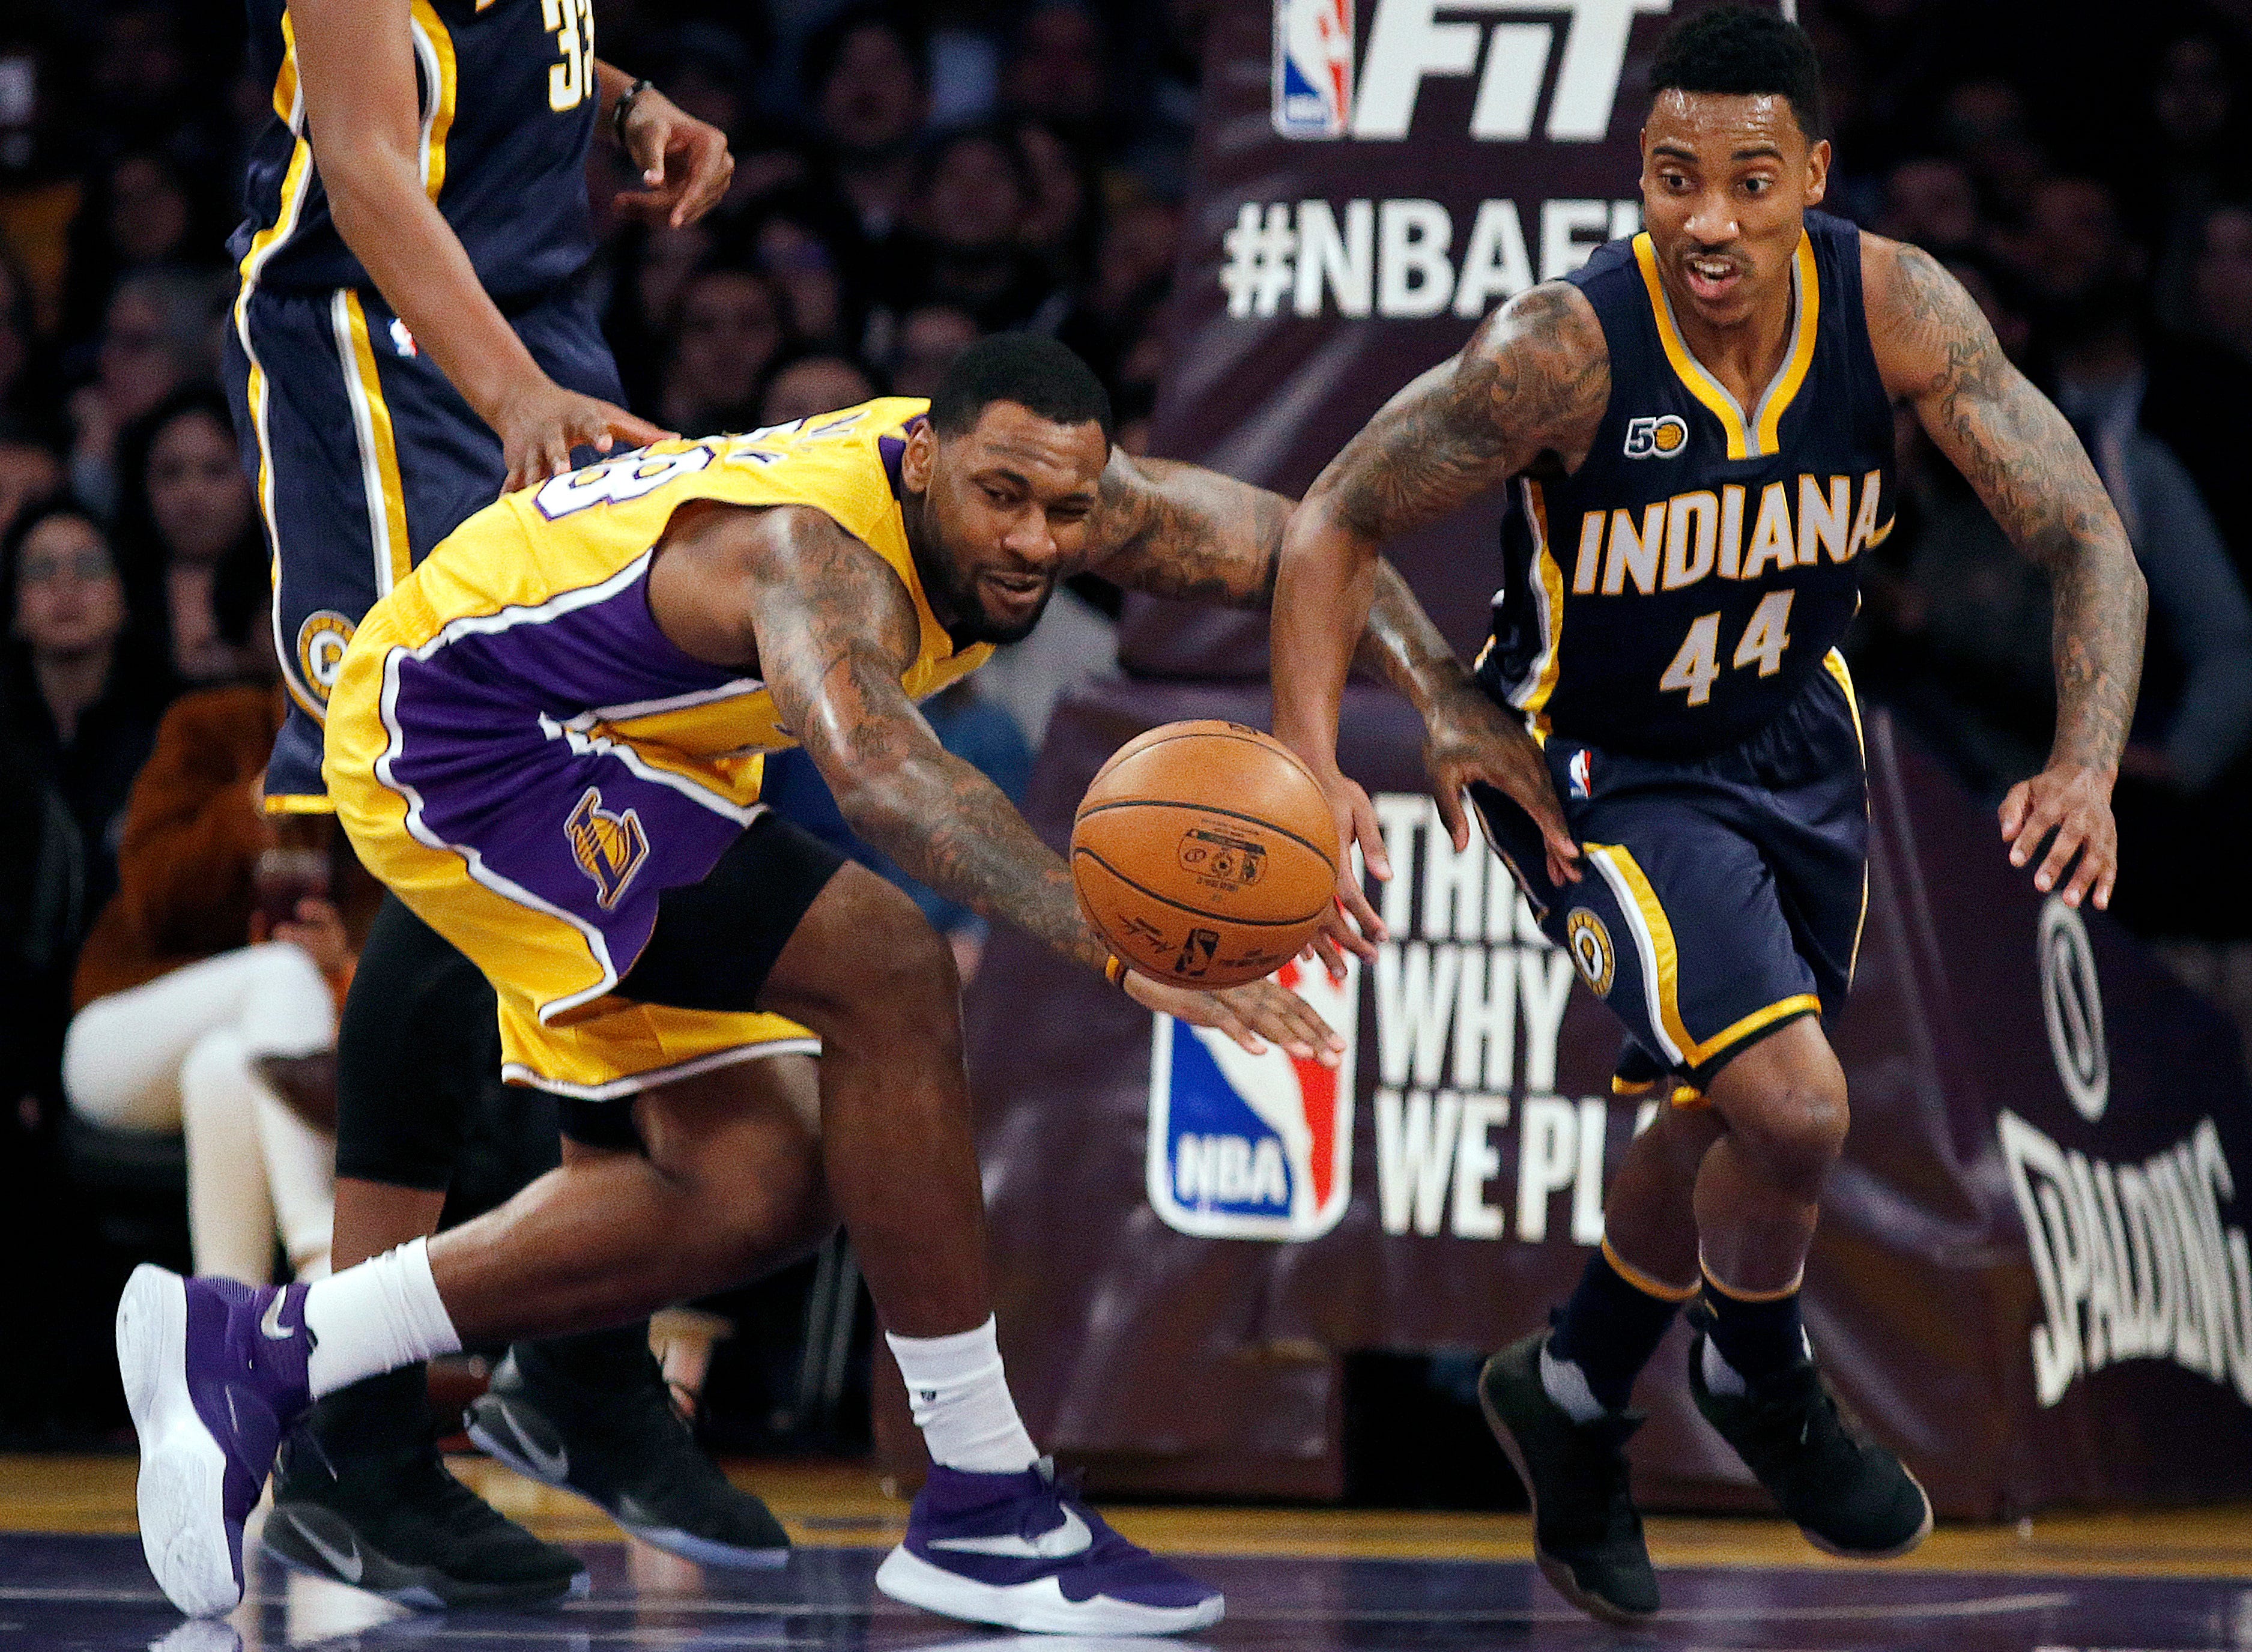 Williams, Young lead Lakers to 108-96 win over Pacers